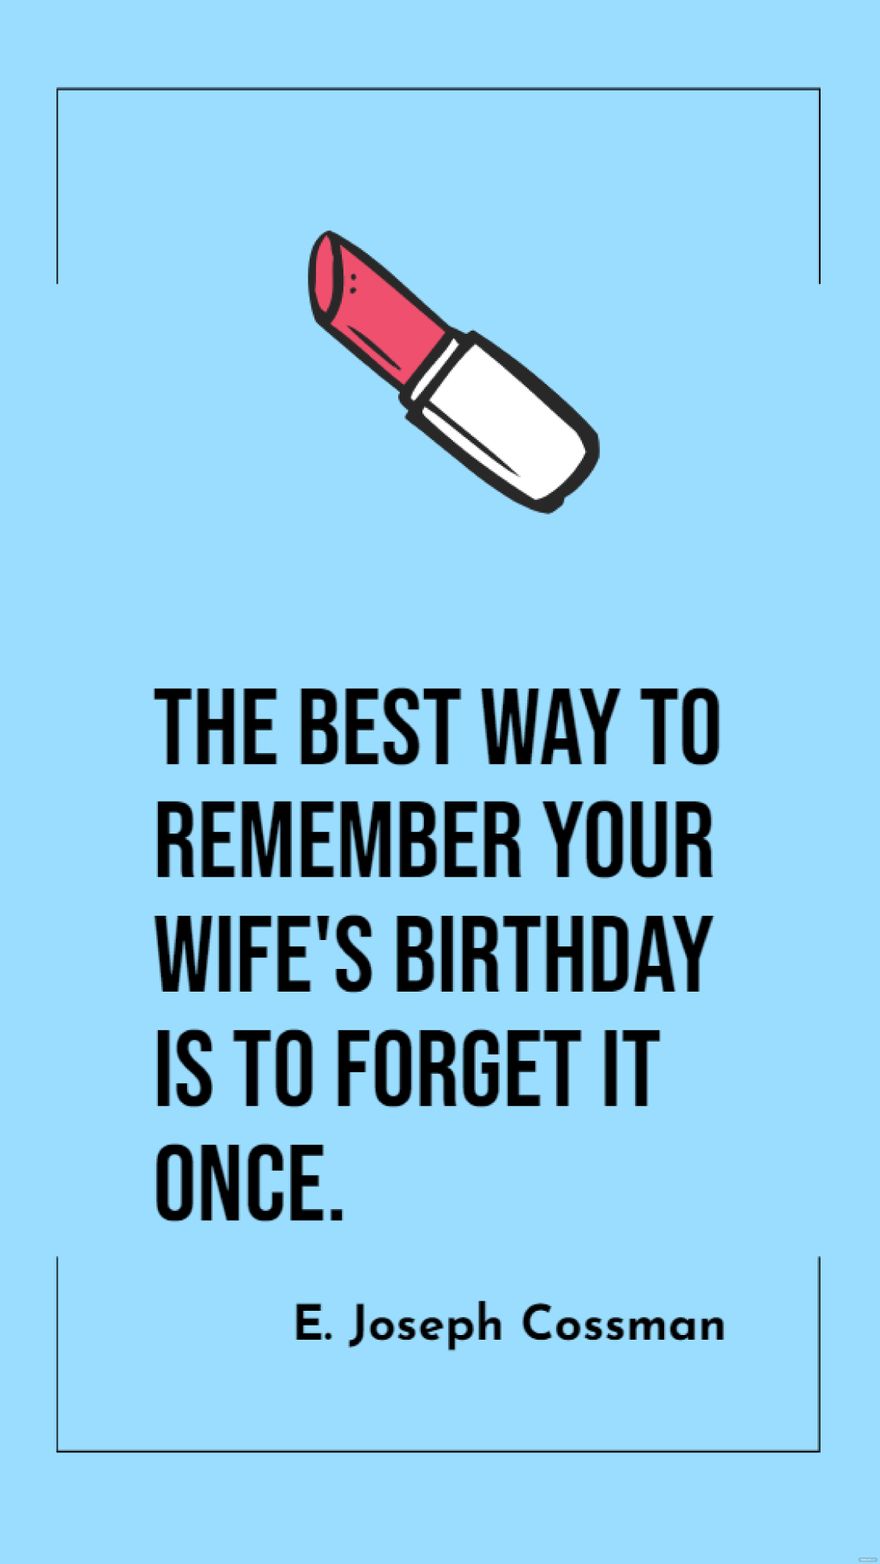 Free E. Joseph Cossman - The best way to remember your wife's birthday is to forget it once. in JPG